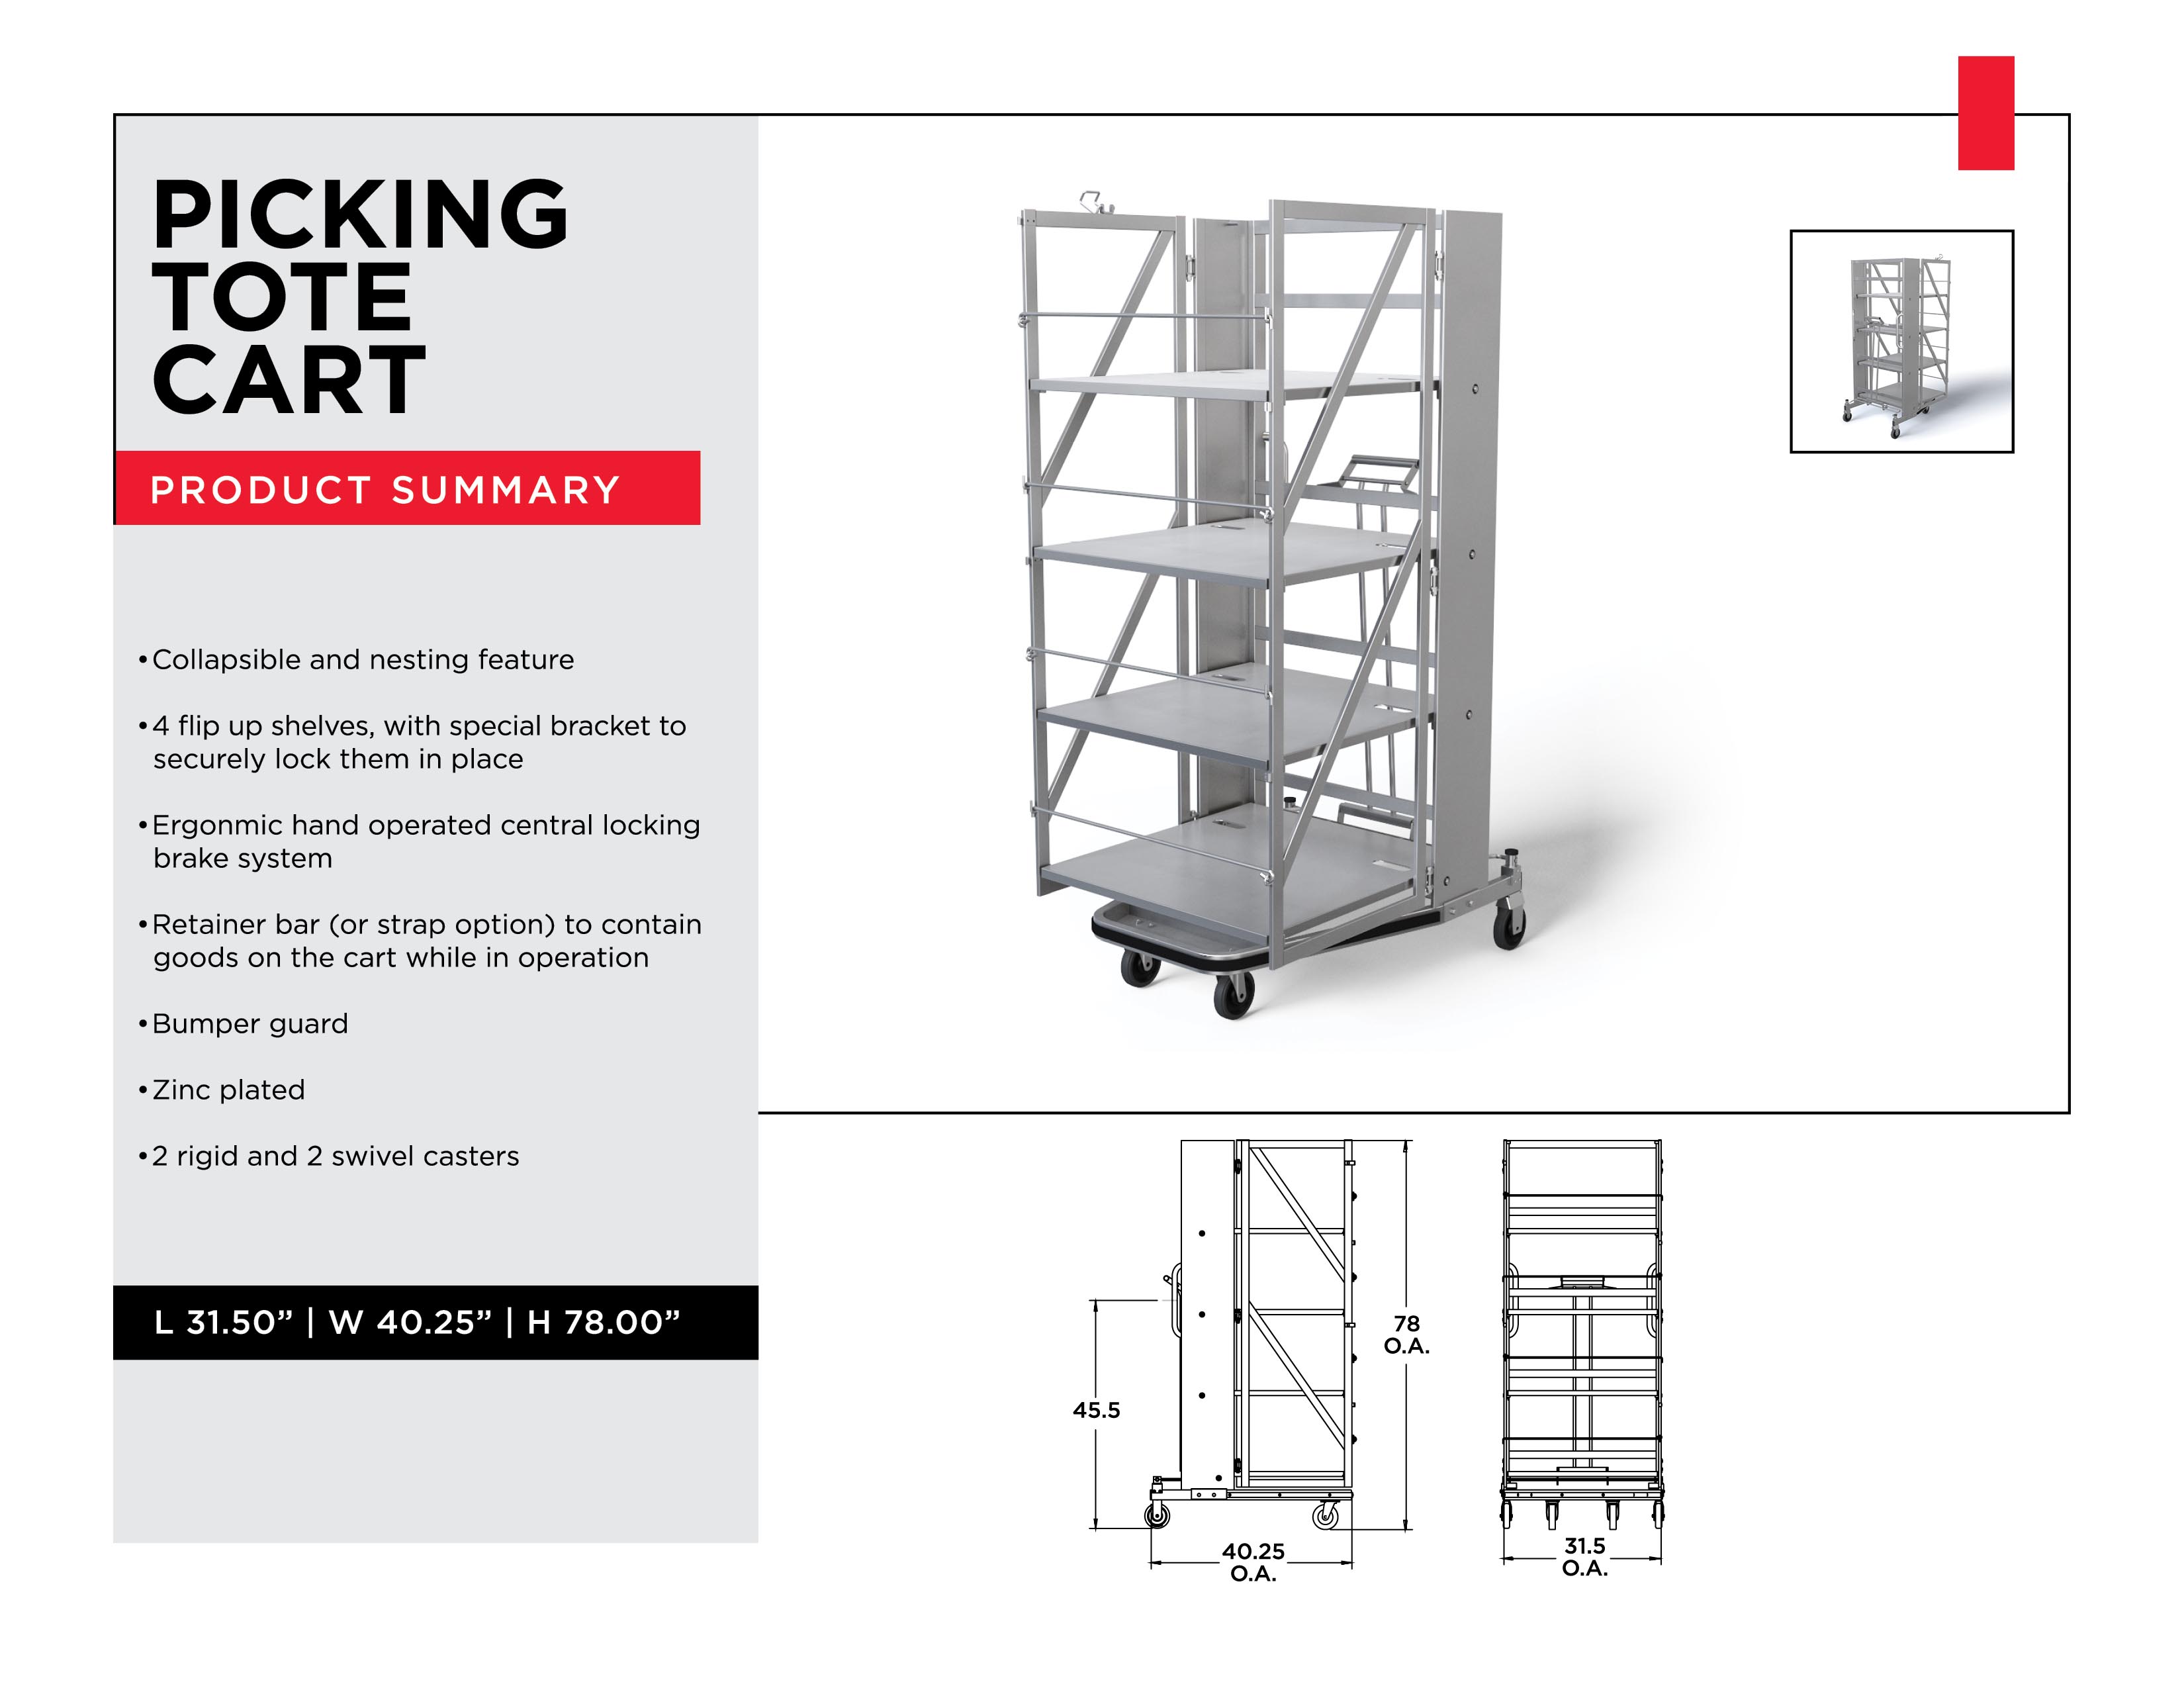 Inventory Distribution Management - Picking tote cart - Material Handling Solutions - Material Handling Equipment - Material Handling